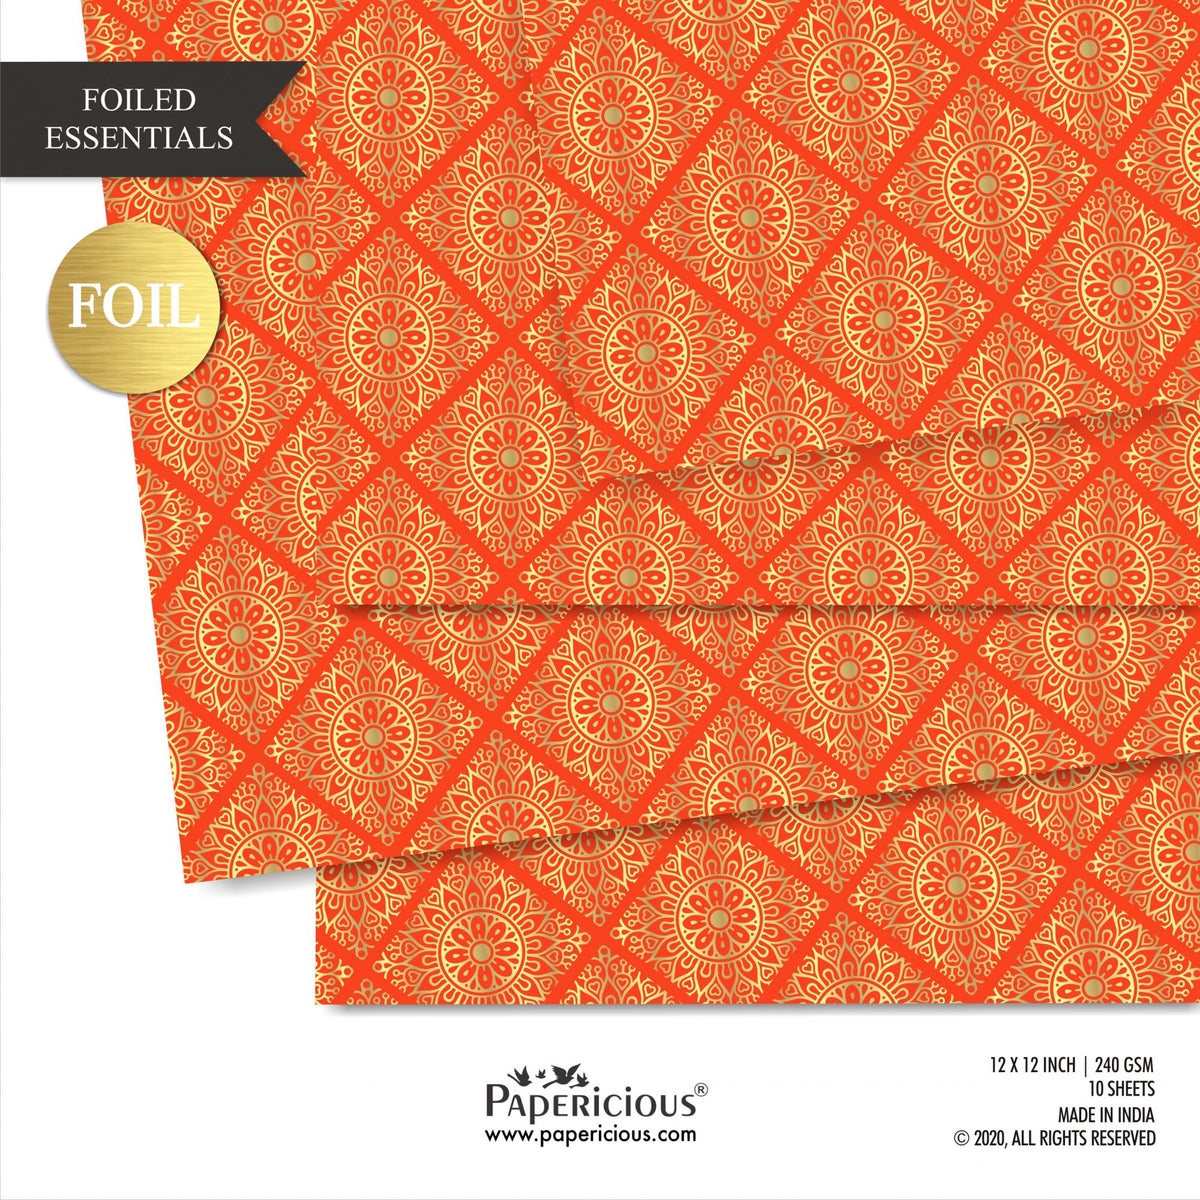 Papericious - Golden Foiled Pattern Scrapbook Papers 12x12 inch / 10 sheets / #12515